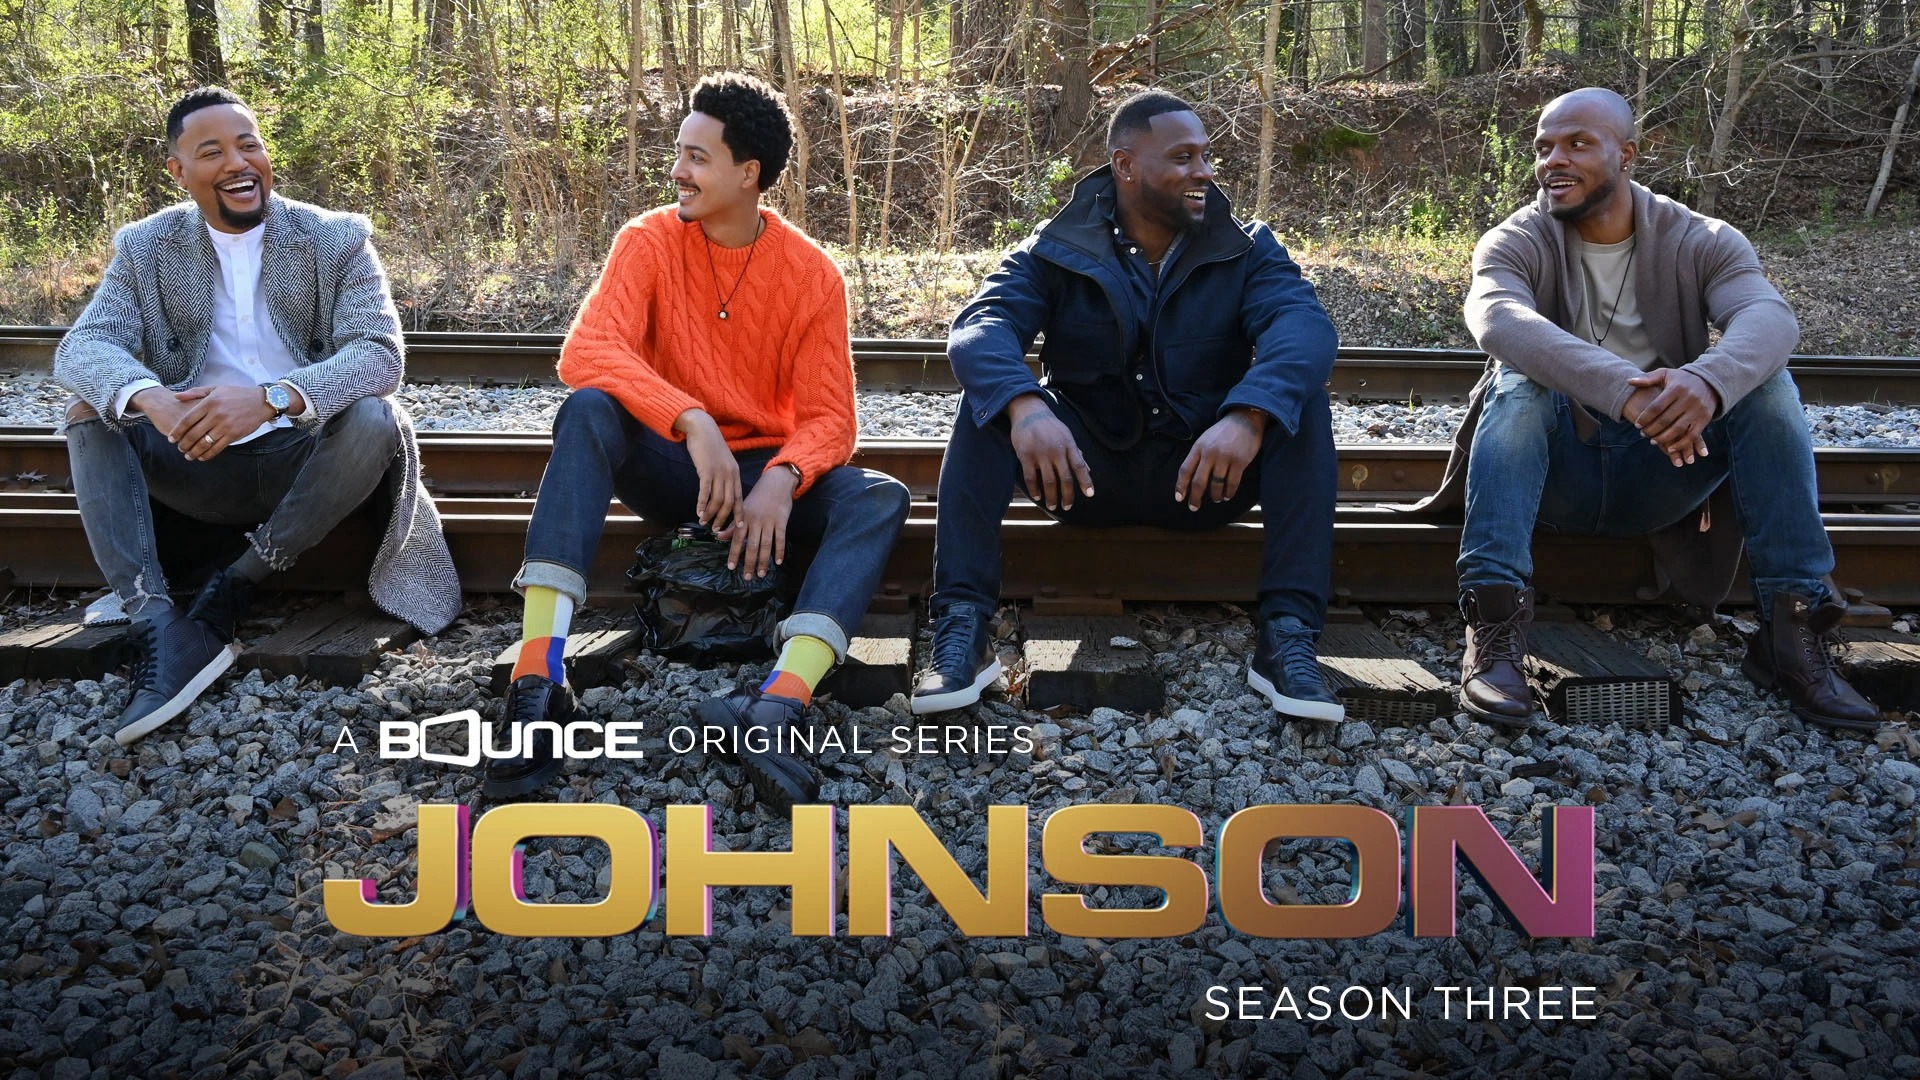 #Johnson: Season Three Renewal and Premiere Date Set for Bounce TV Dramedy Series